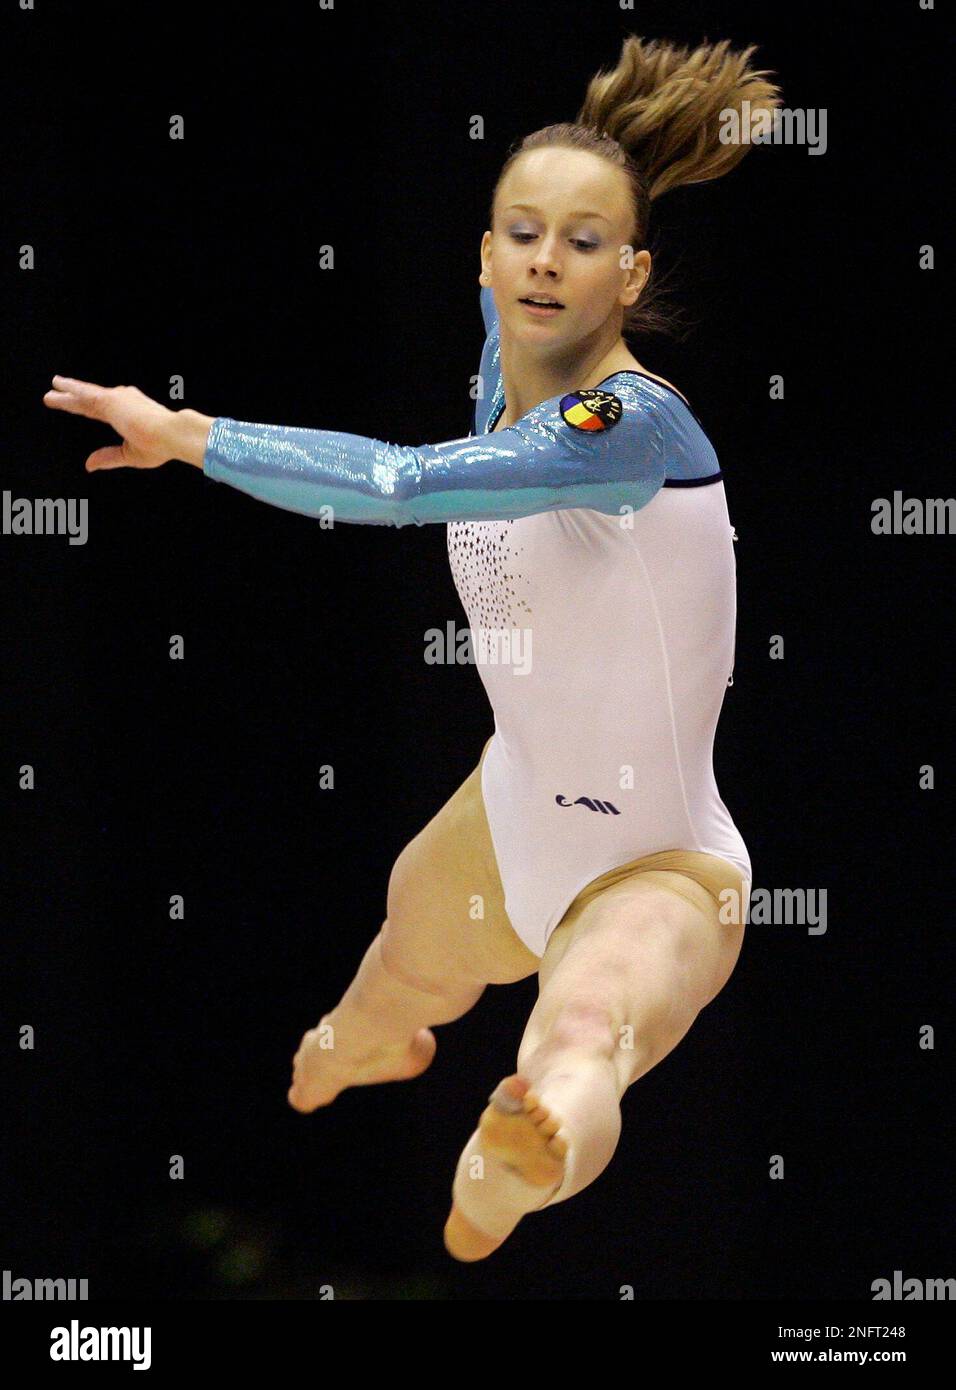 Romanias Sandra Raluca Izbasa on her way to win at the floor exercise during the apparatus final of the 27th womens Artistic Gymnastics European championships in Clermont-Ferrand, central France, Sunday, April 6,